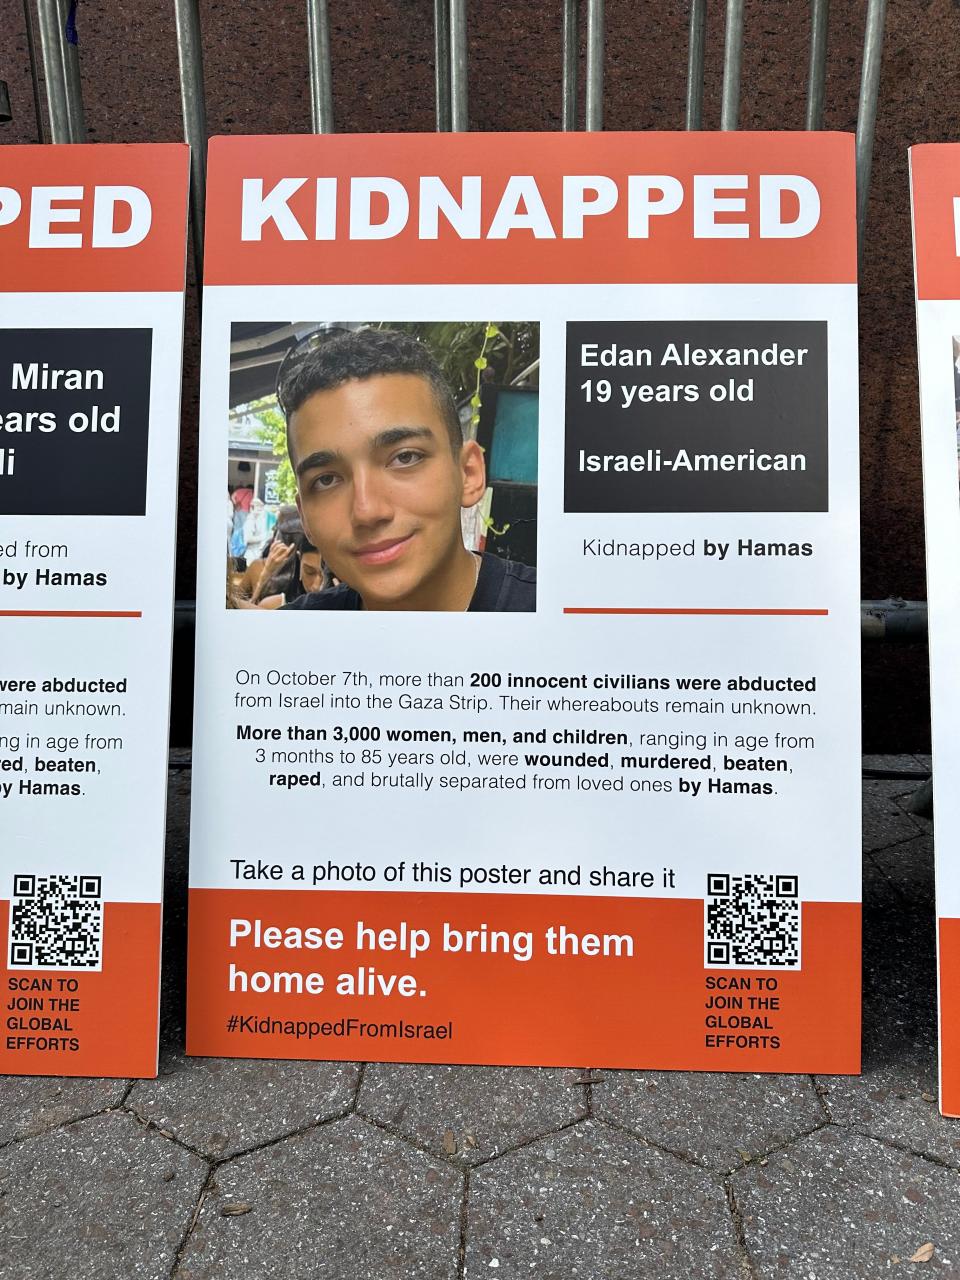 Edan Alexander, 19, a Tenafly High School graduate, was serving in the Israeli army near Gaza and is believed among 220 people captured by Hamas on Oct. 7.